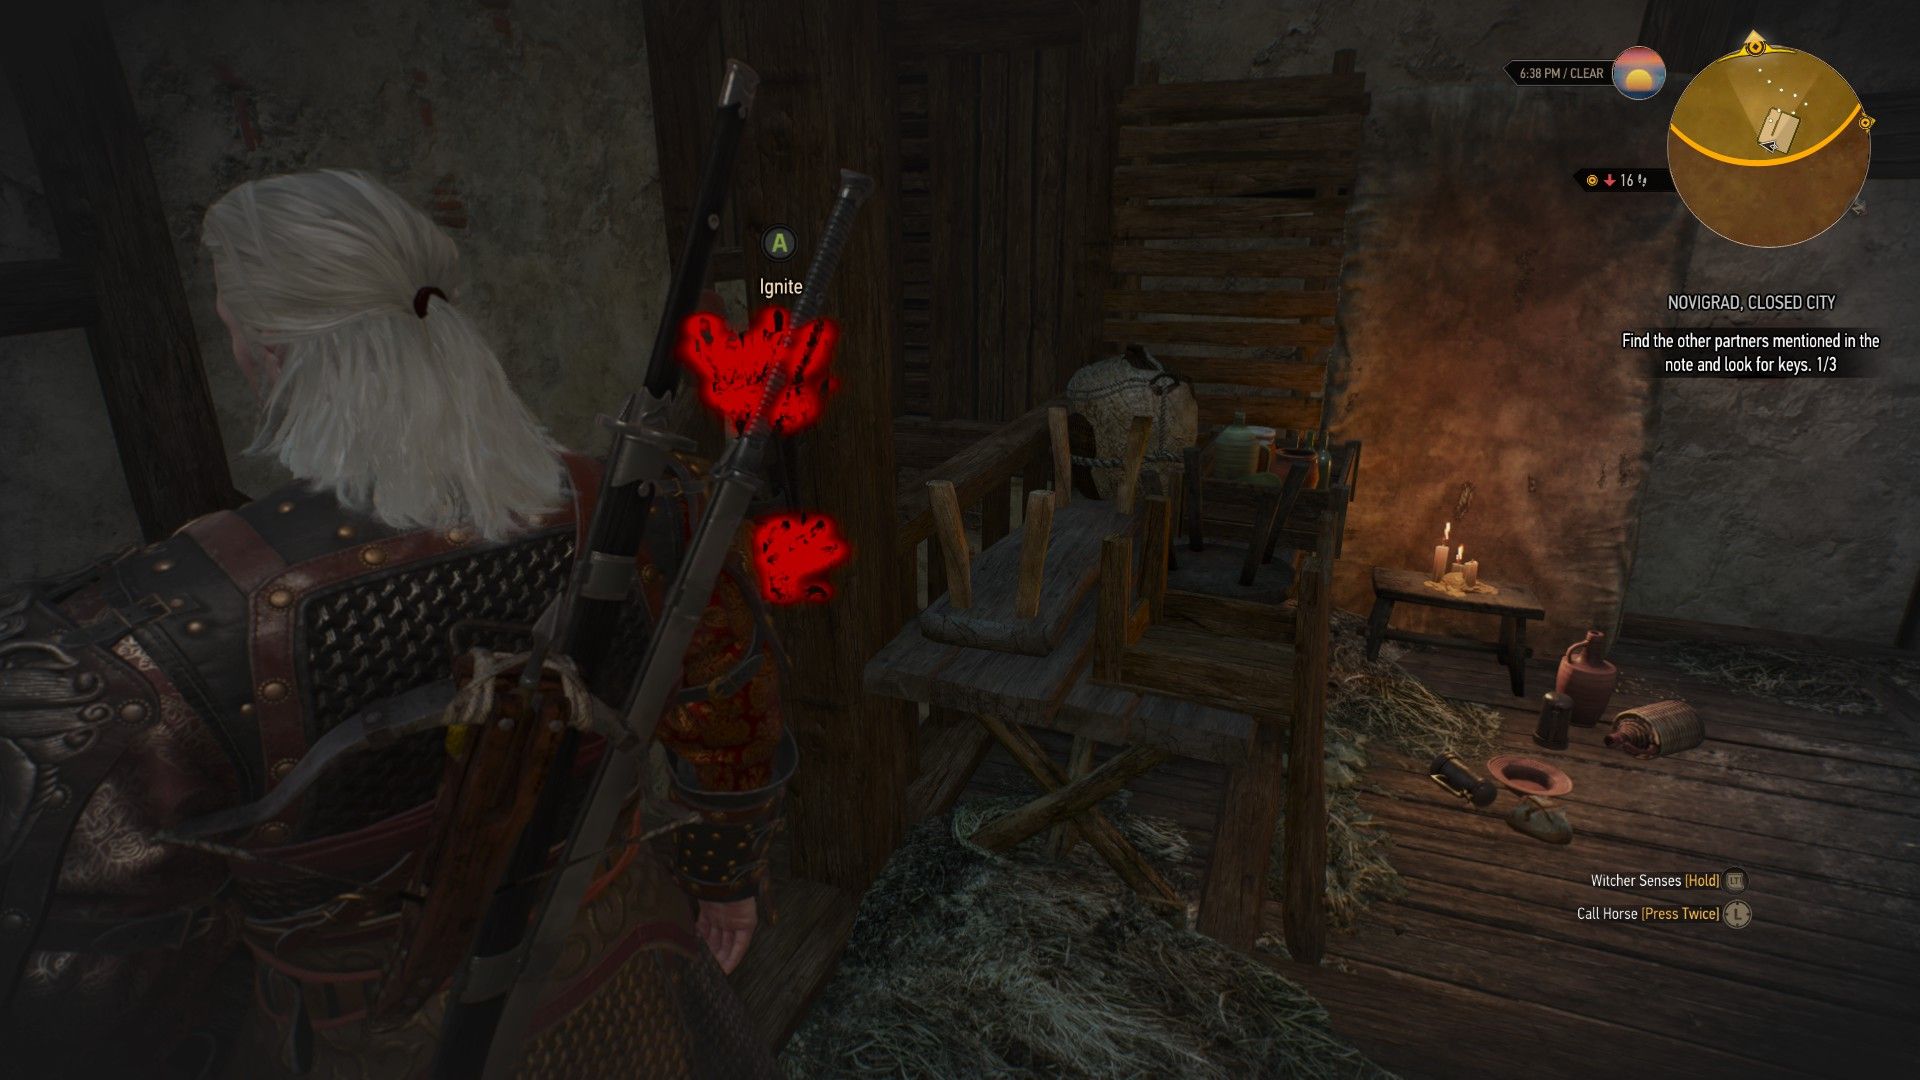 A screenshot of The Witcher 3 showing a piece of furniture highlighted in red by Geralt's Witcher Senses.